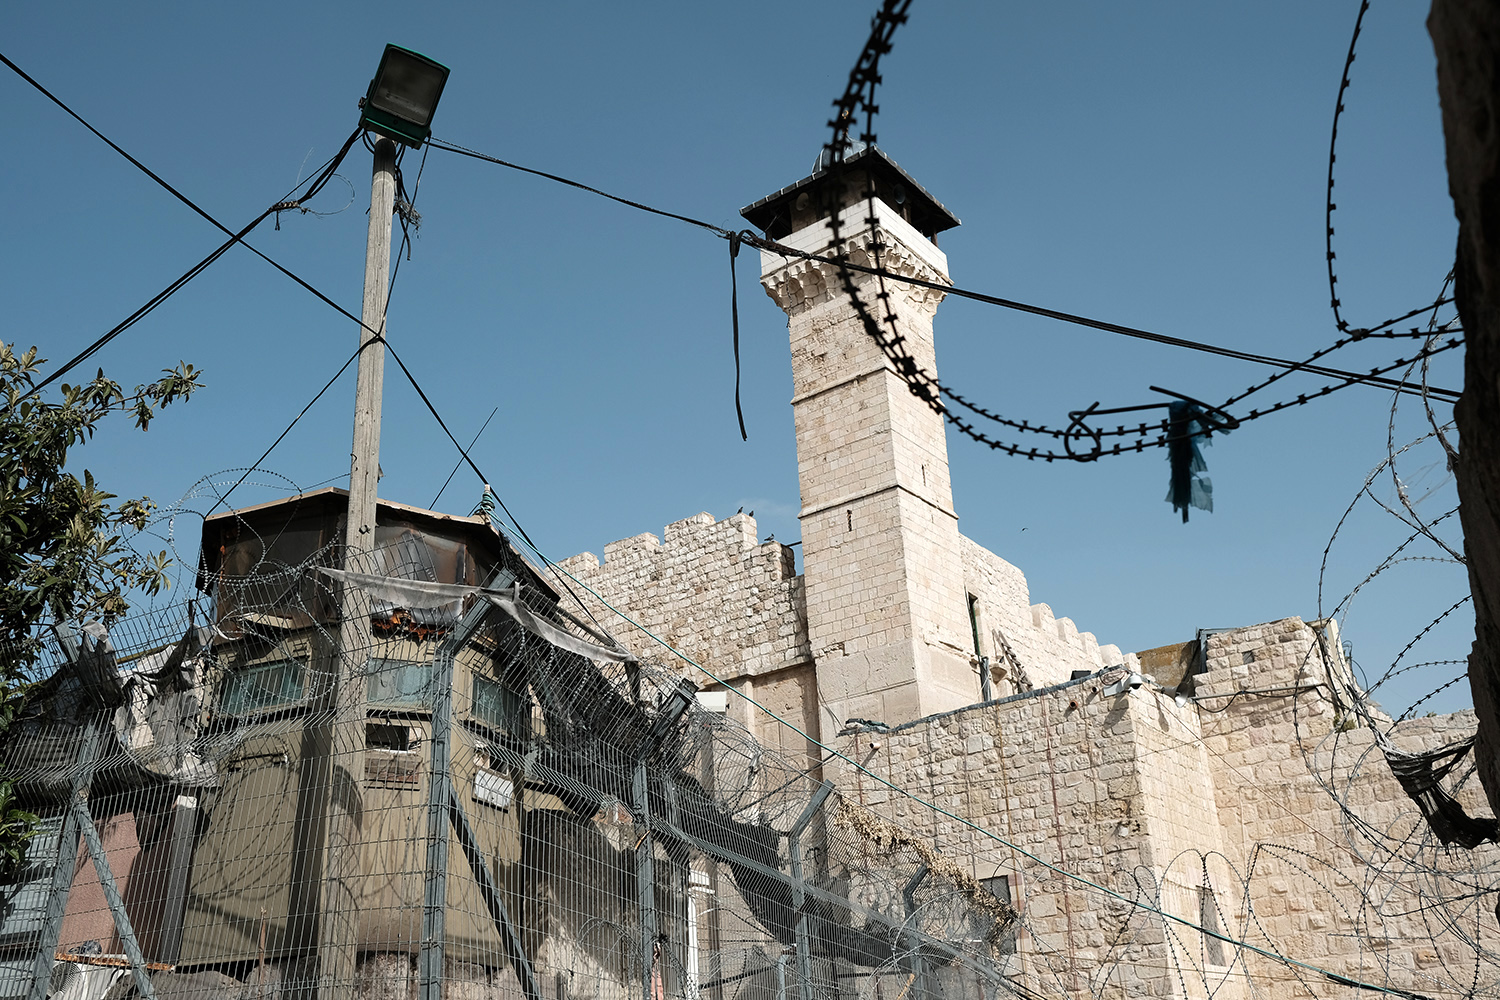  Hebron: Tomb of the Patriarchs/Ibrahimi Mosque is considered the burying place of Abraham. The structure is separated by heavy security into a synagogue and a mosque. In 1994, an American-Israeli murdered 29 muslims gathered for prayer in the mosque